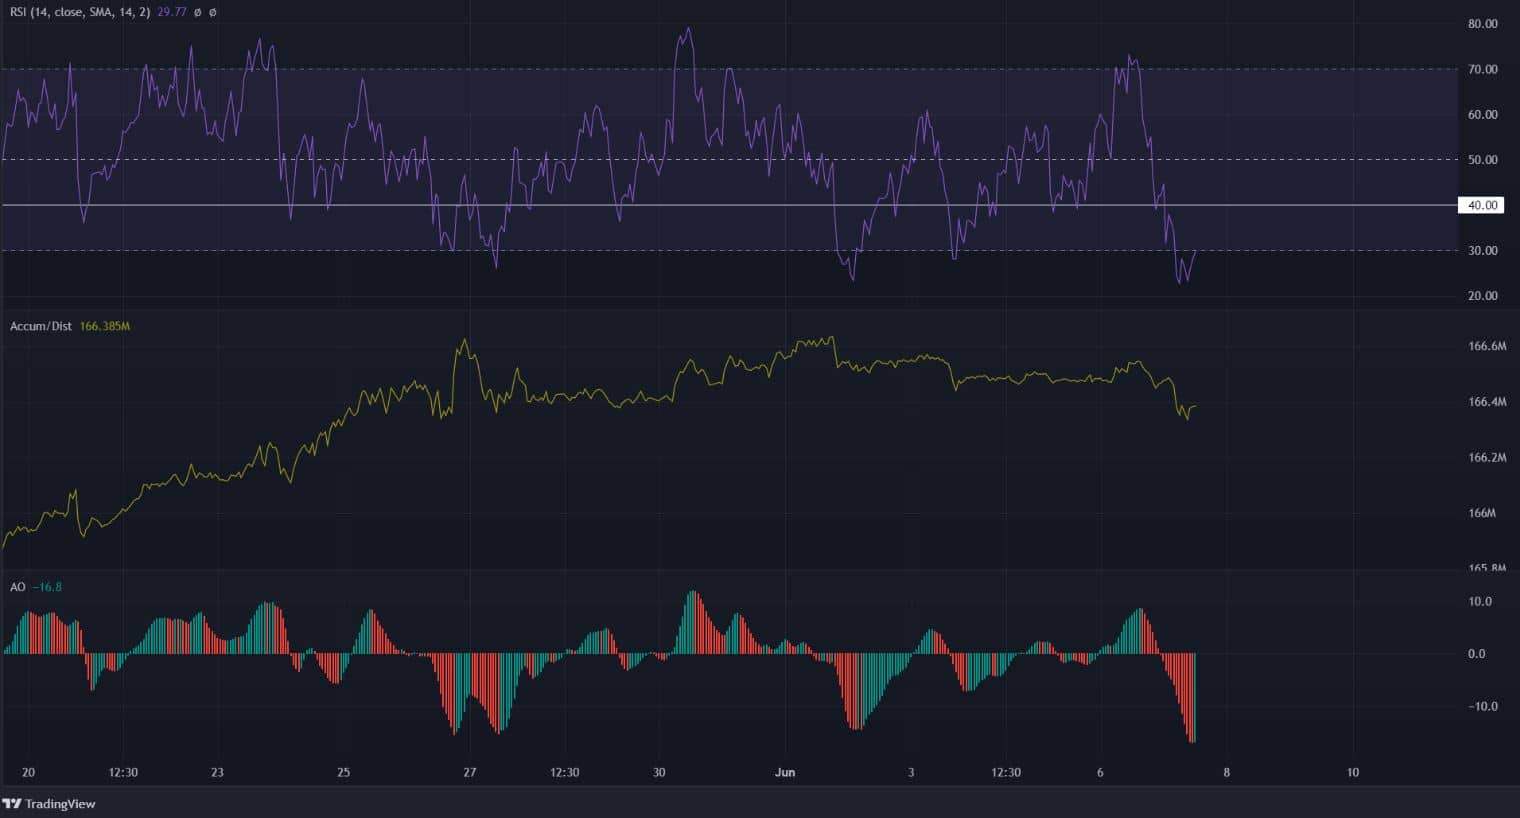 Binance Coin crashed beneath range lows, approaches a demand zone